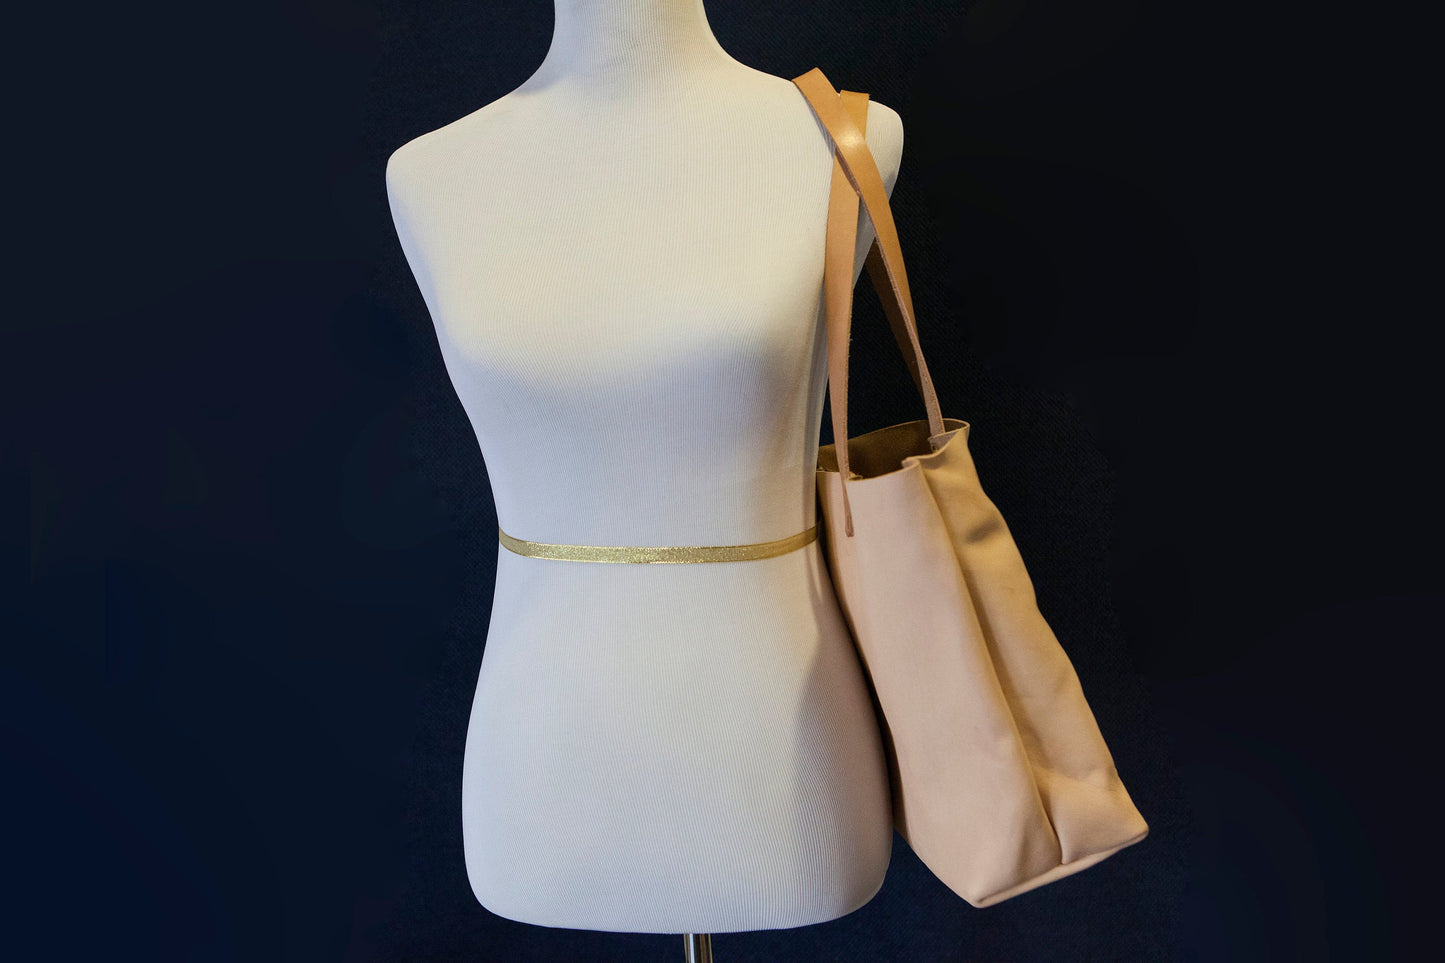 Made to Order - Natural Vegetable Tanned Leather Tote Shoulder Bag Made in USA